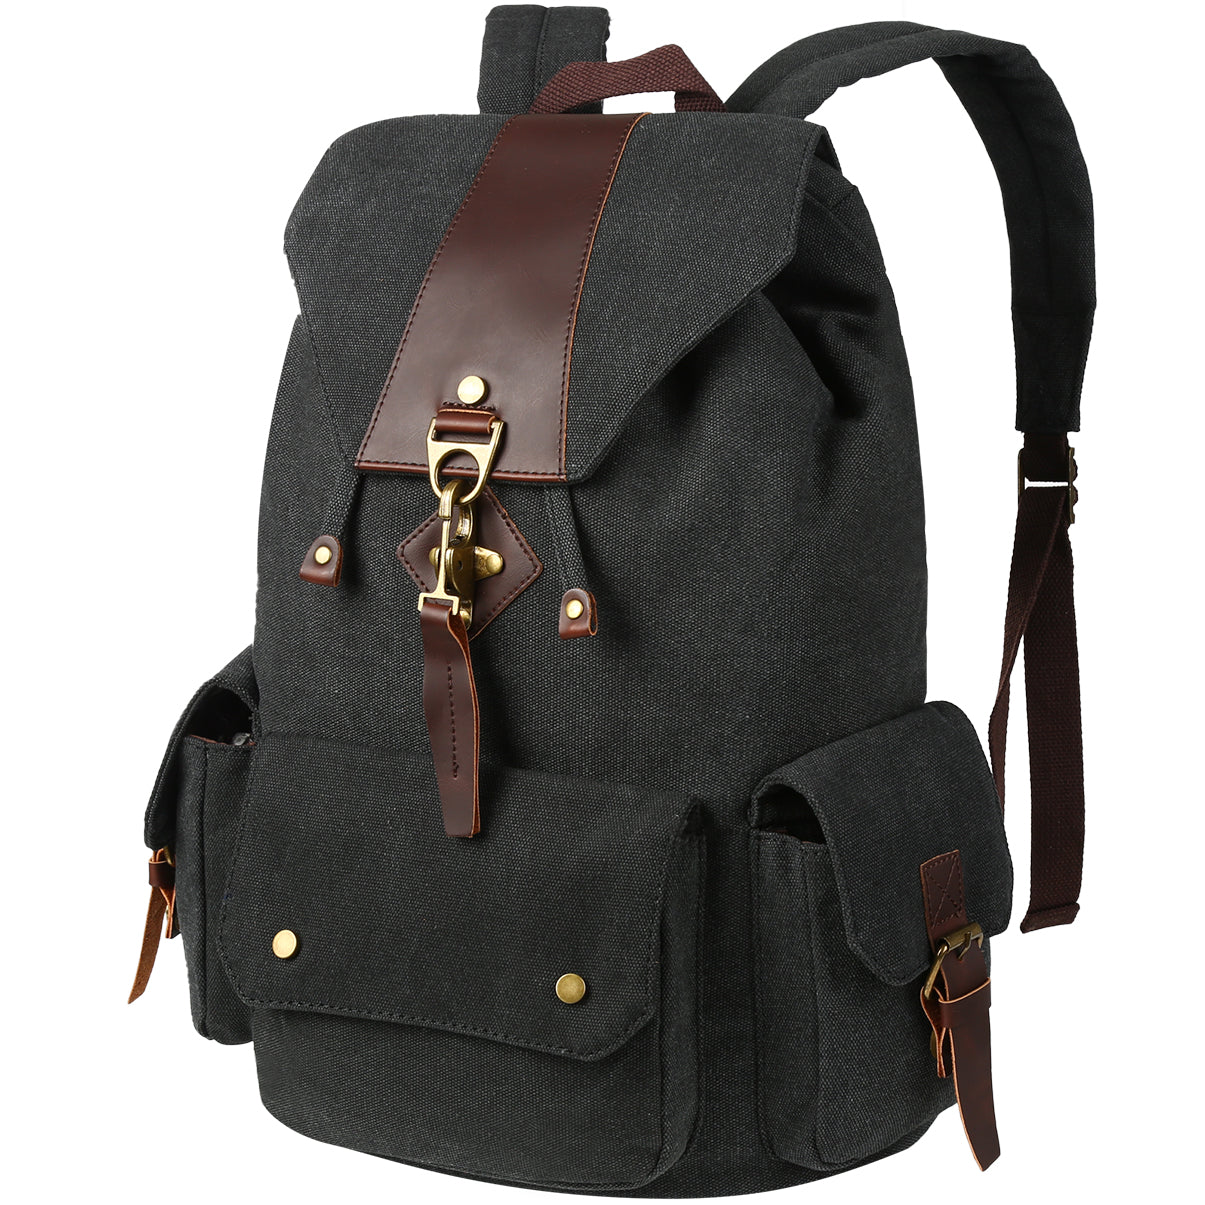 Styling tips for Canvas and Leather Backpacks